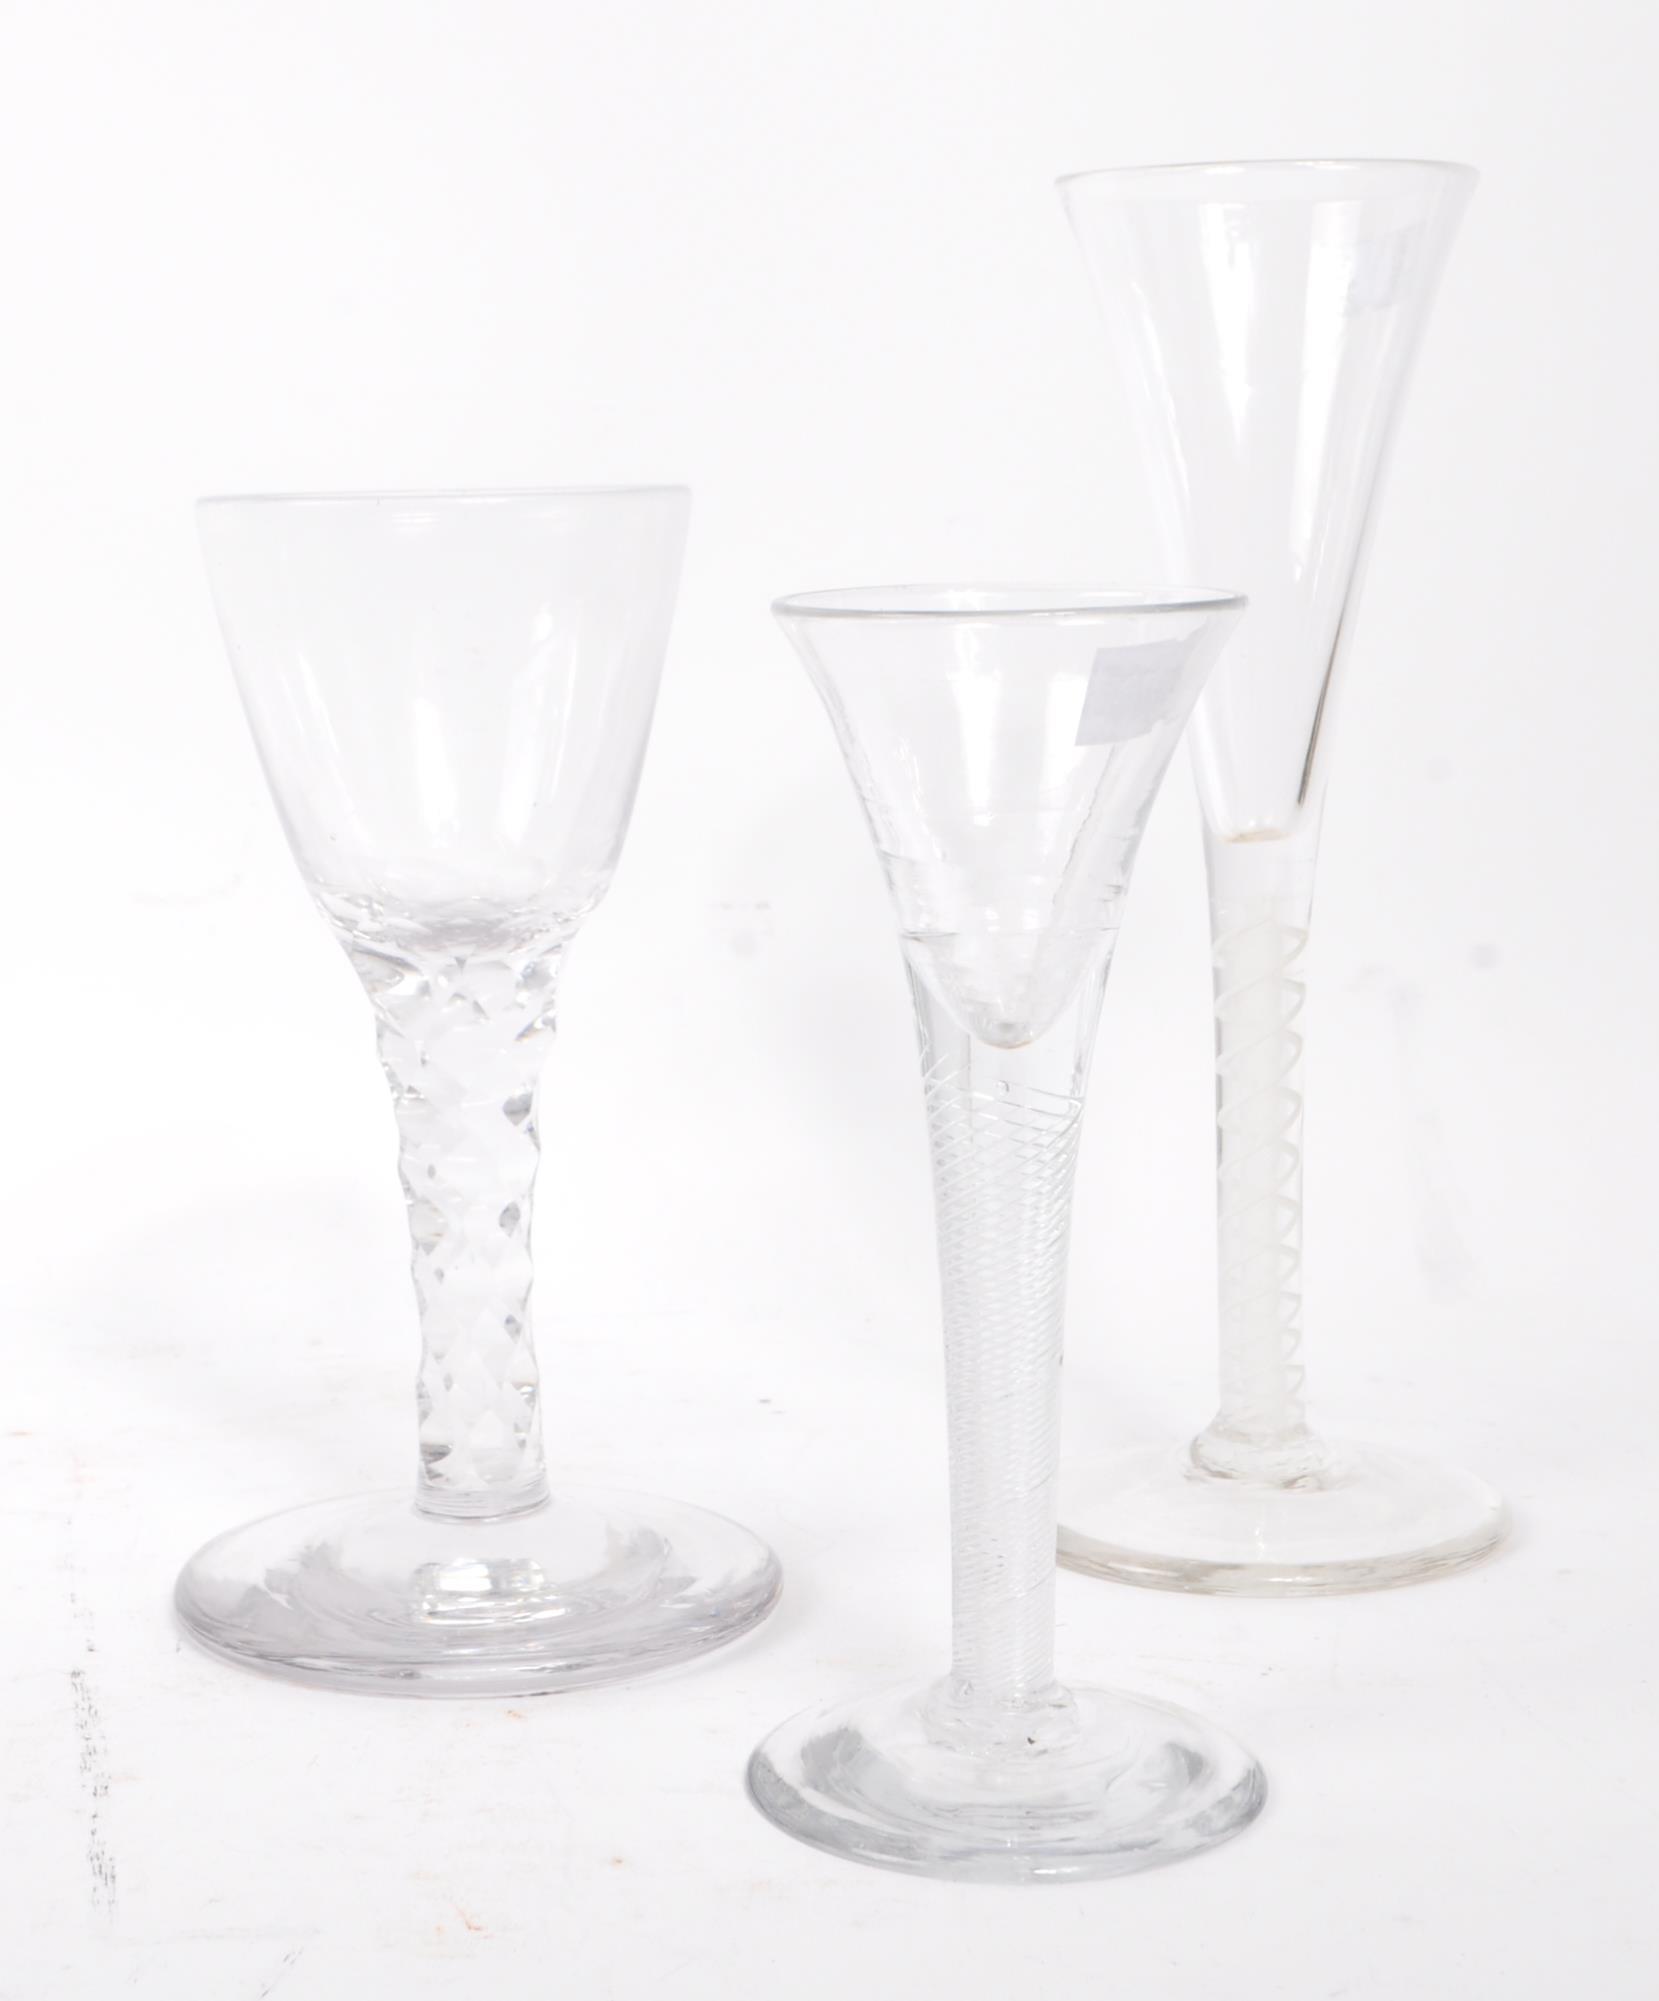 COLLECTION OF THREE GEORGIAN STEMMED WINE GLASSES